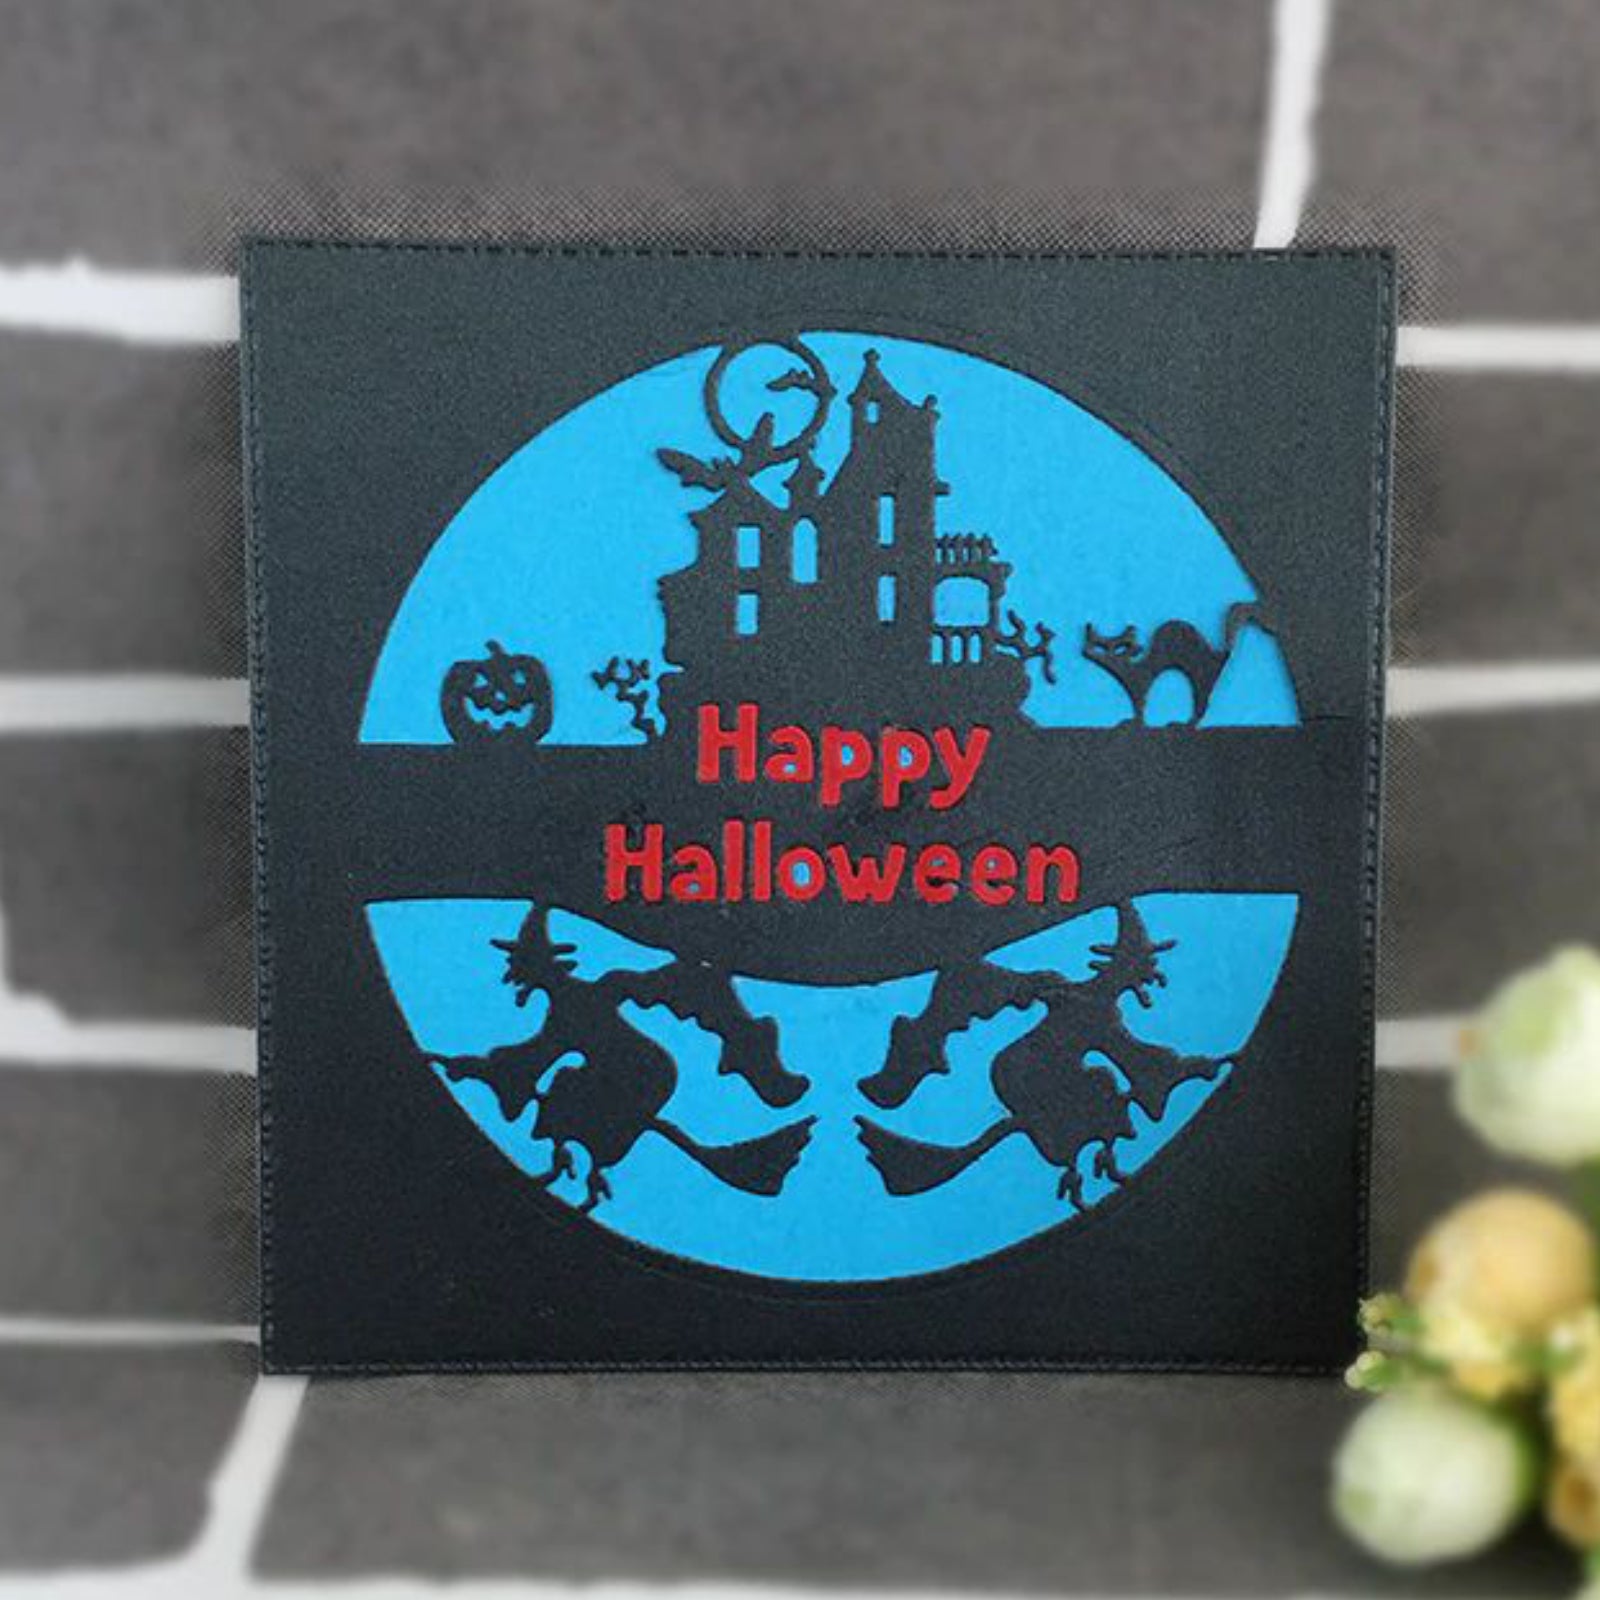 Happy Halloween Large Circular Scene Cutting Die w Witches Bats Castle Cat